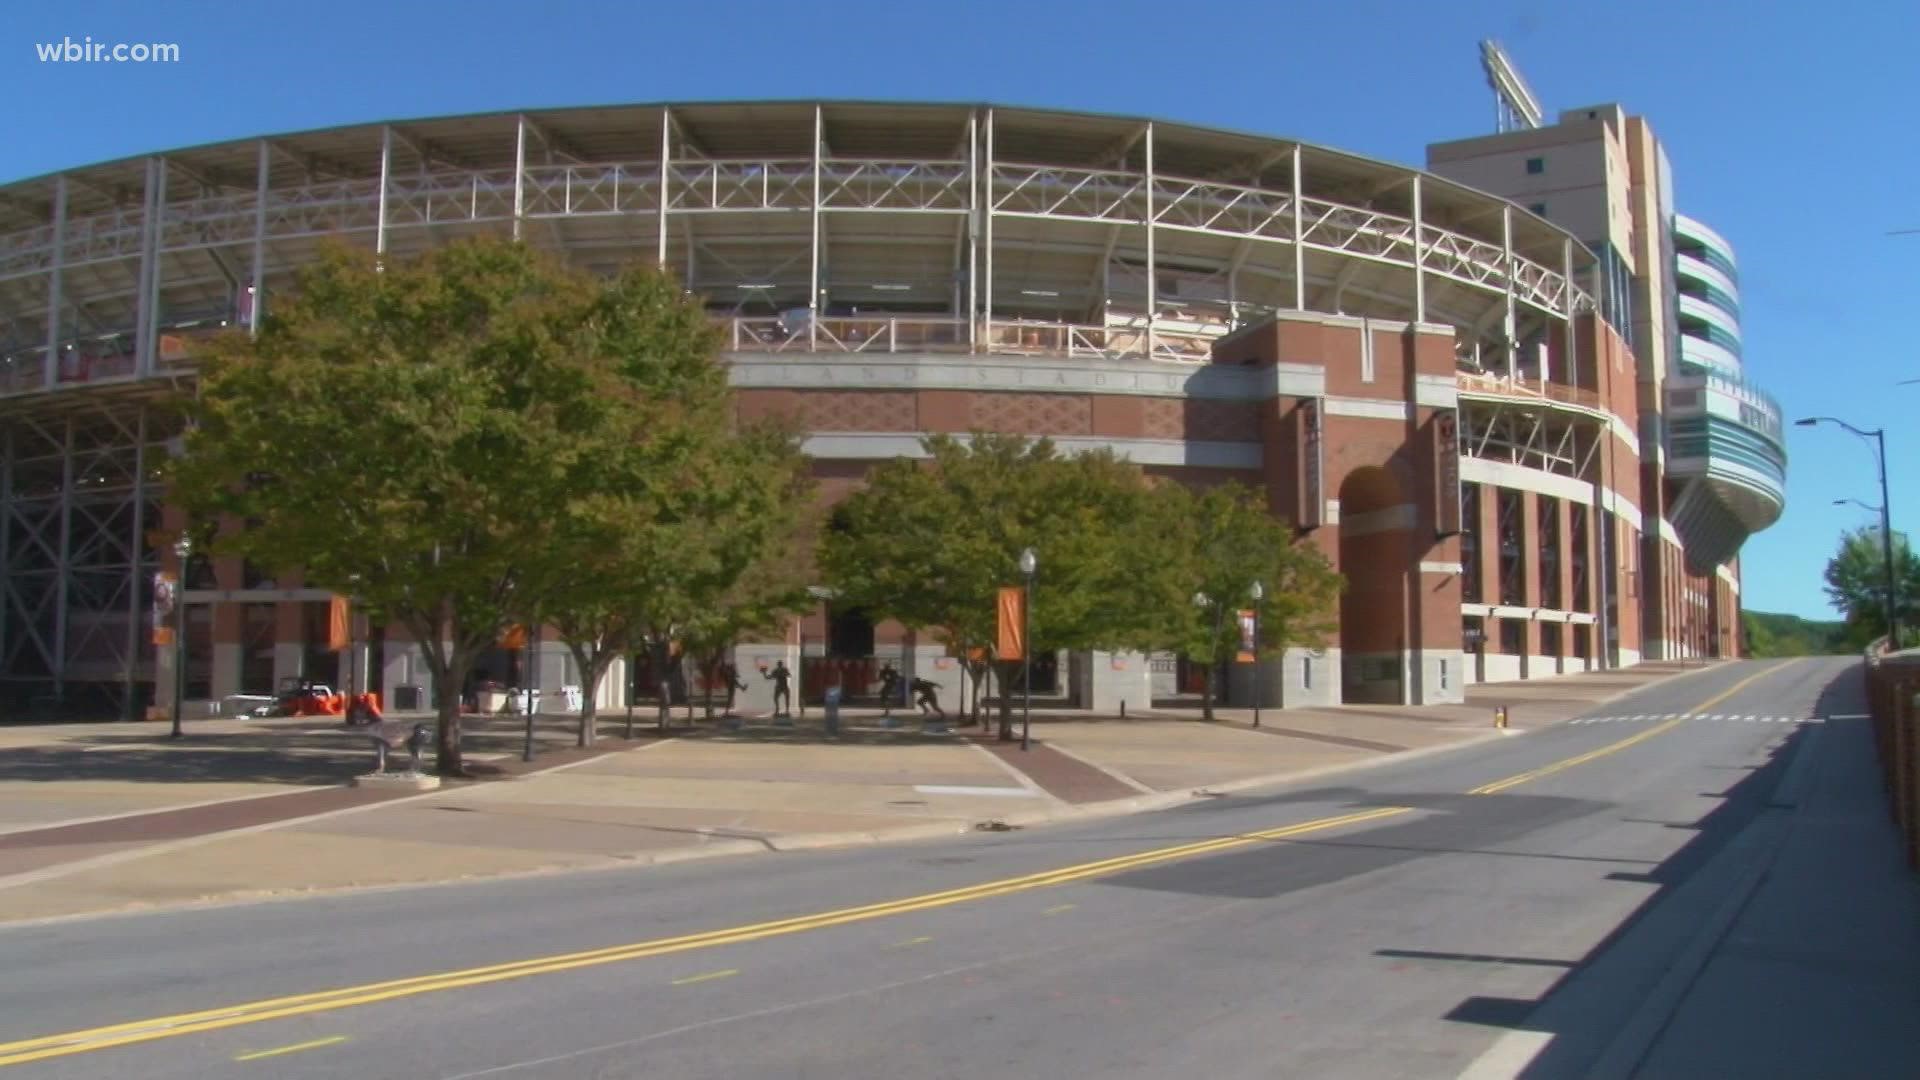 The university of Tennessee is making changes after fans threw objects on the field during the Ole Miss game two weeks ago.